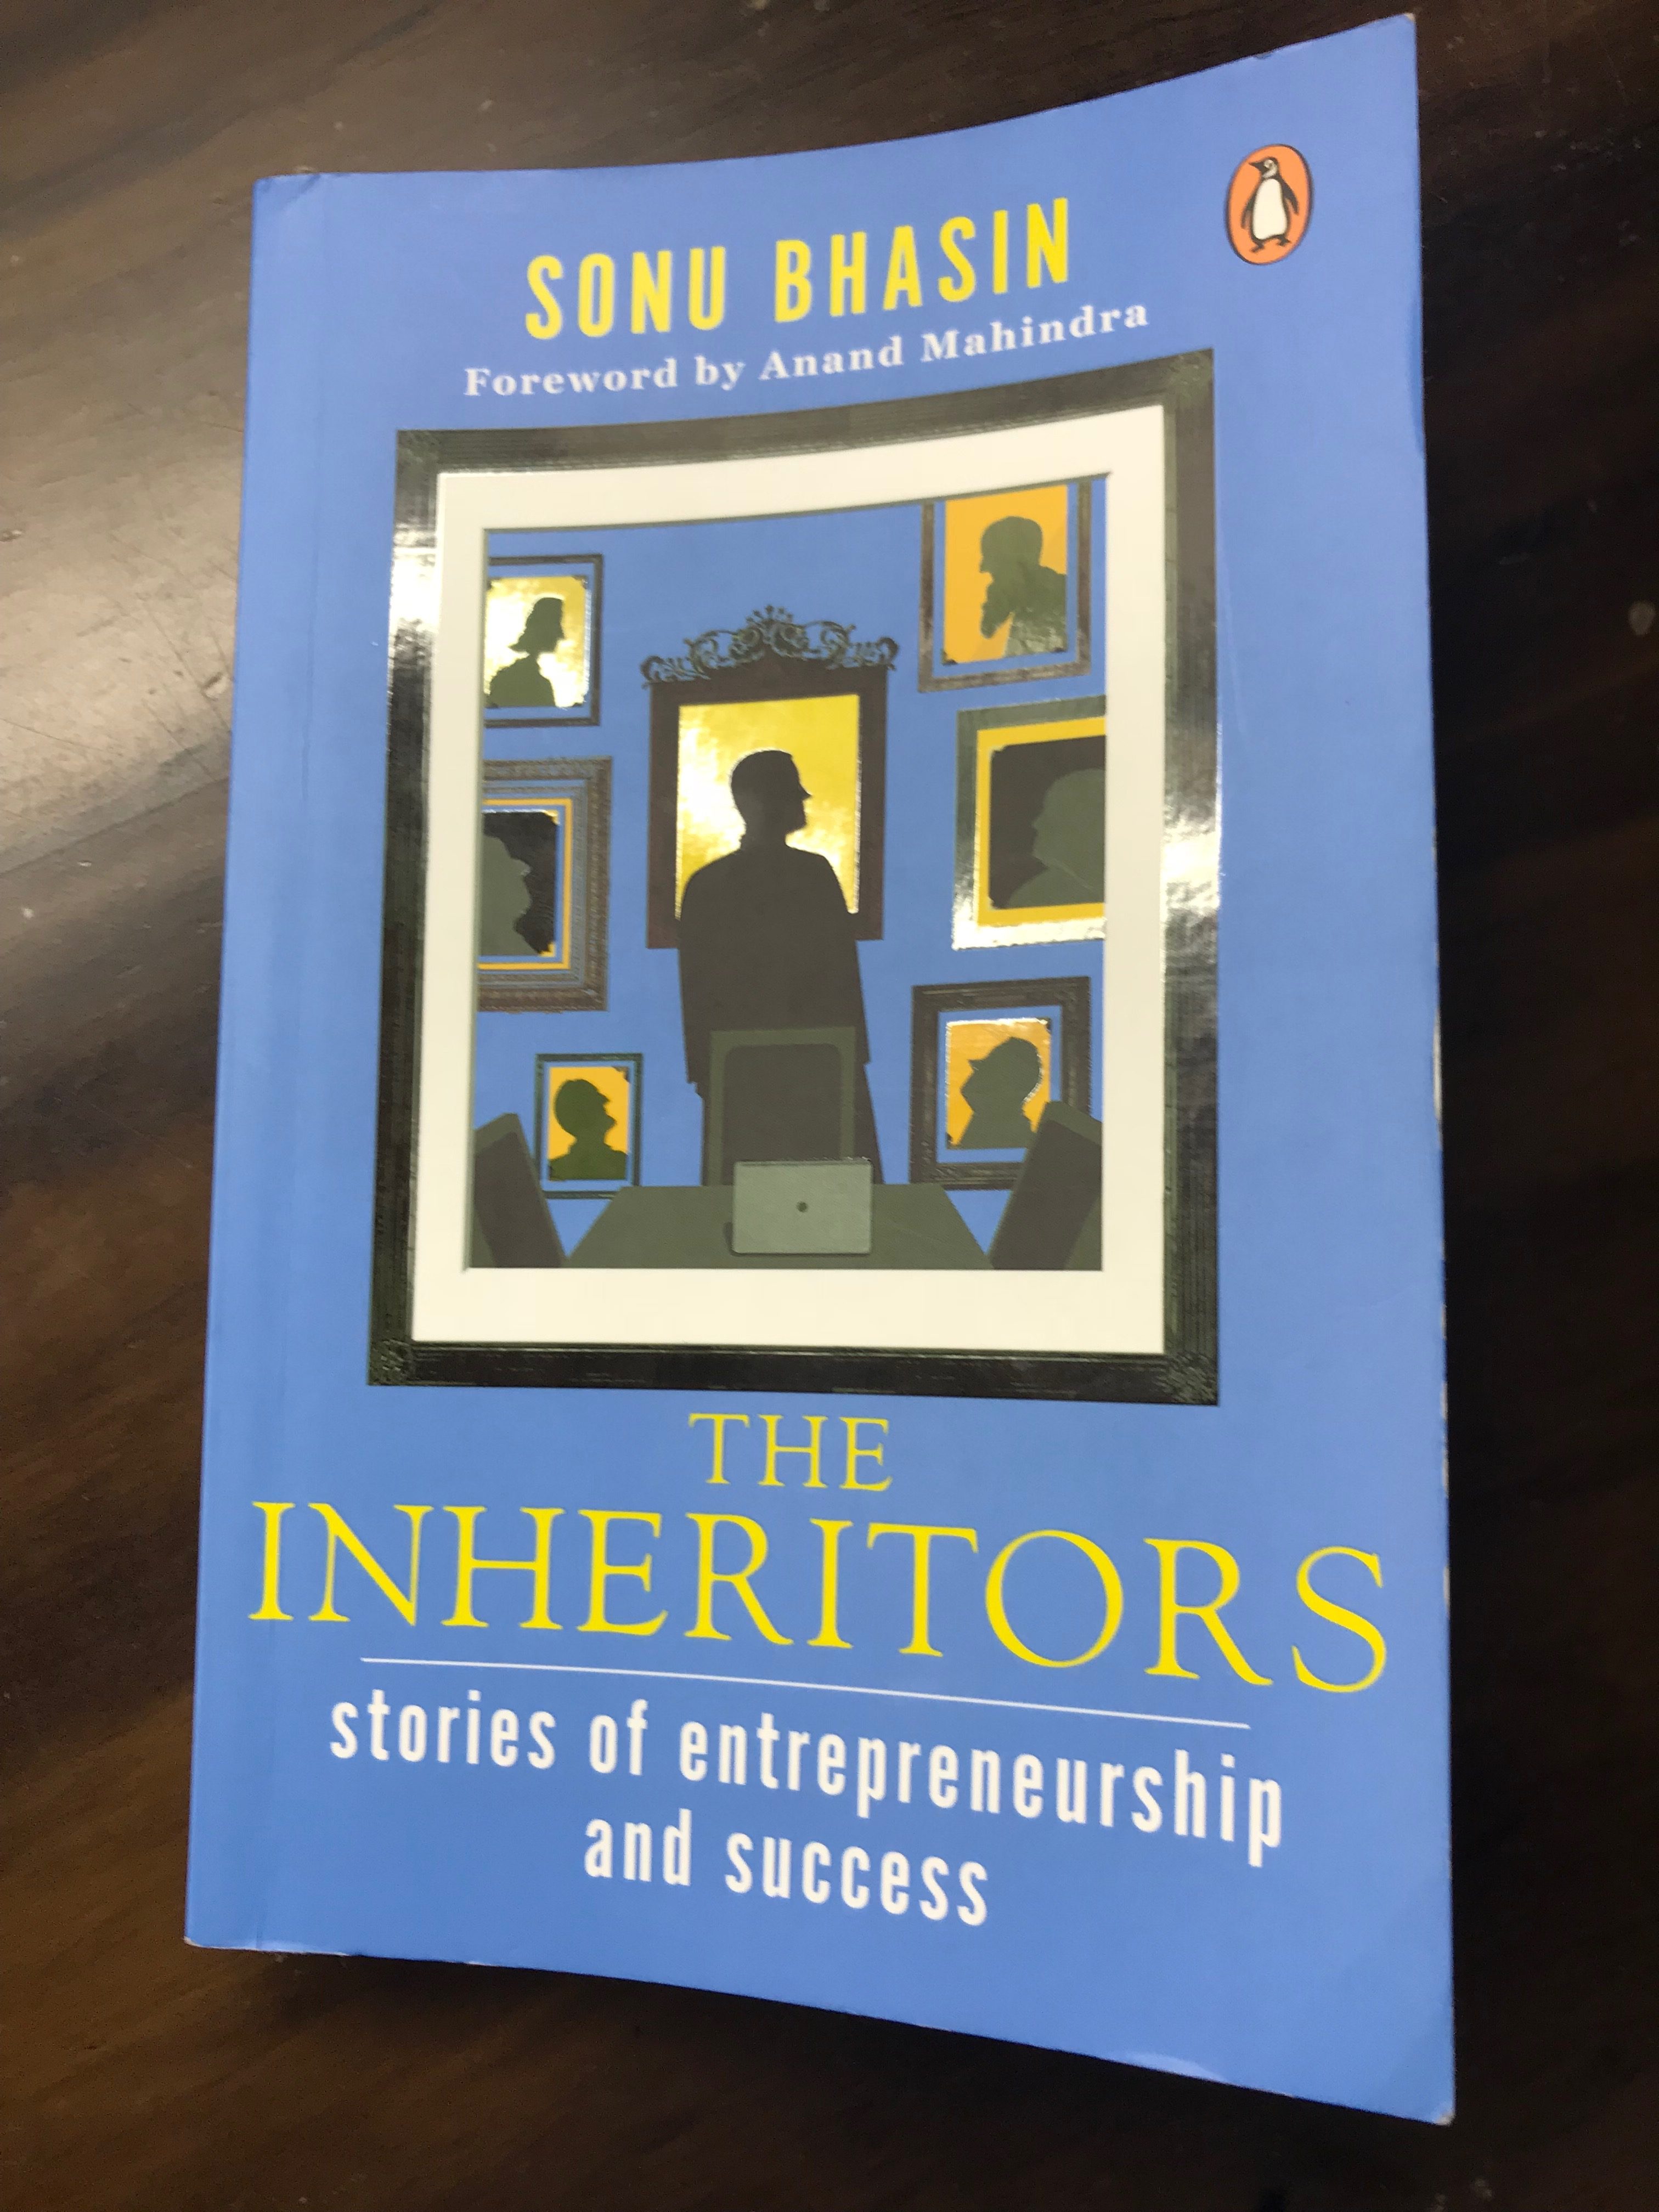 You are currently viewing The Inheritors by Sonu Bhasin: Looking at family businesses in India